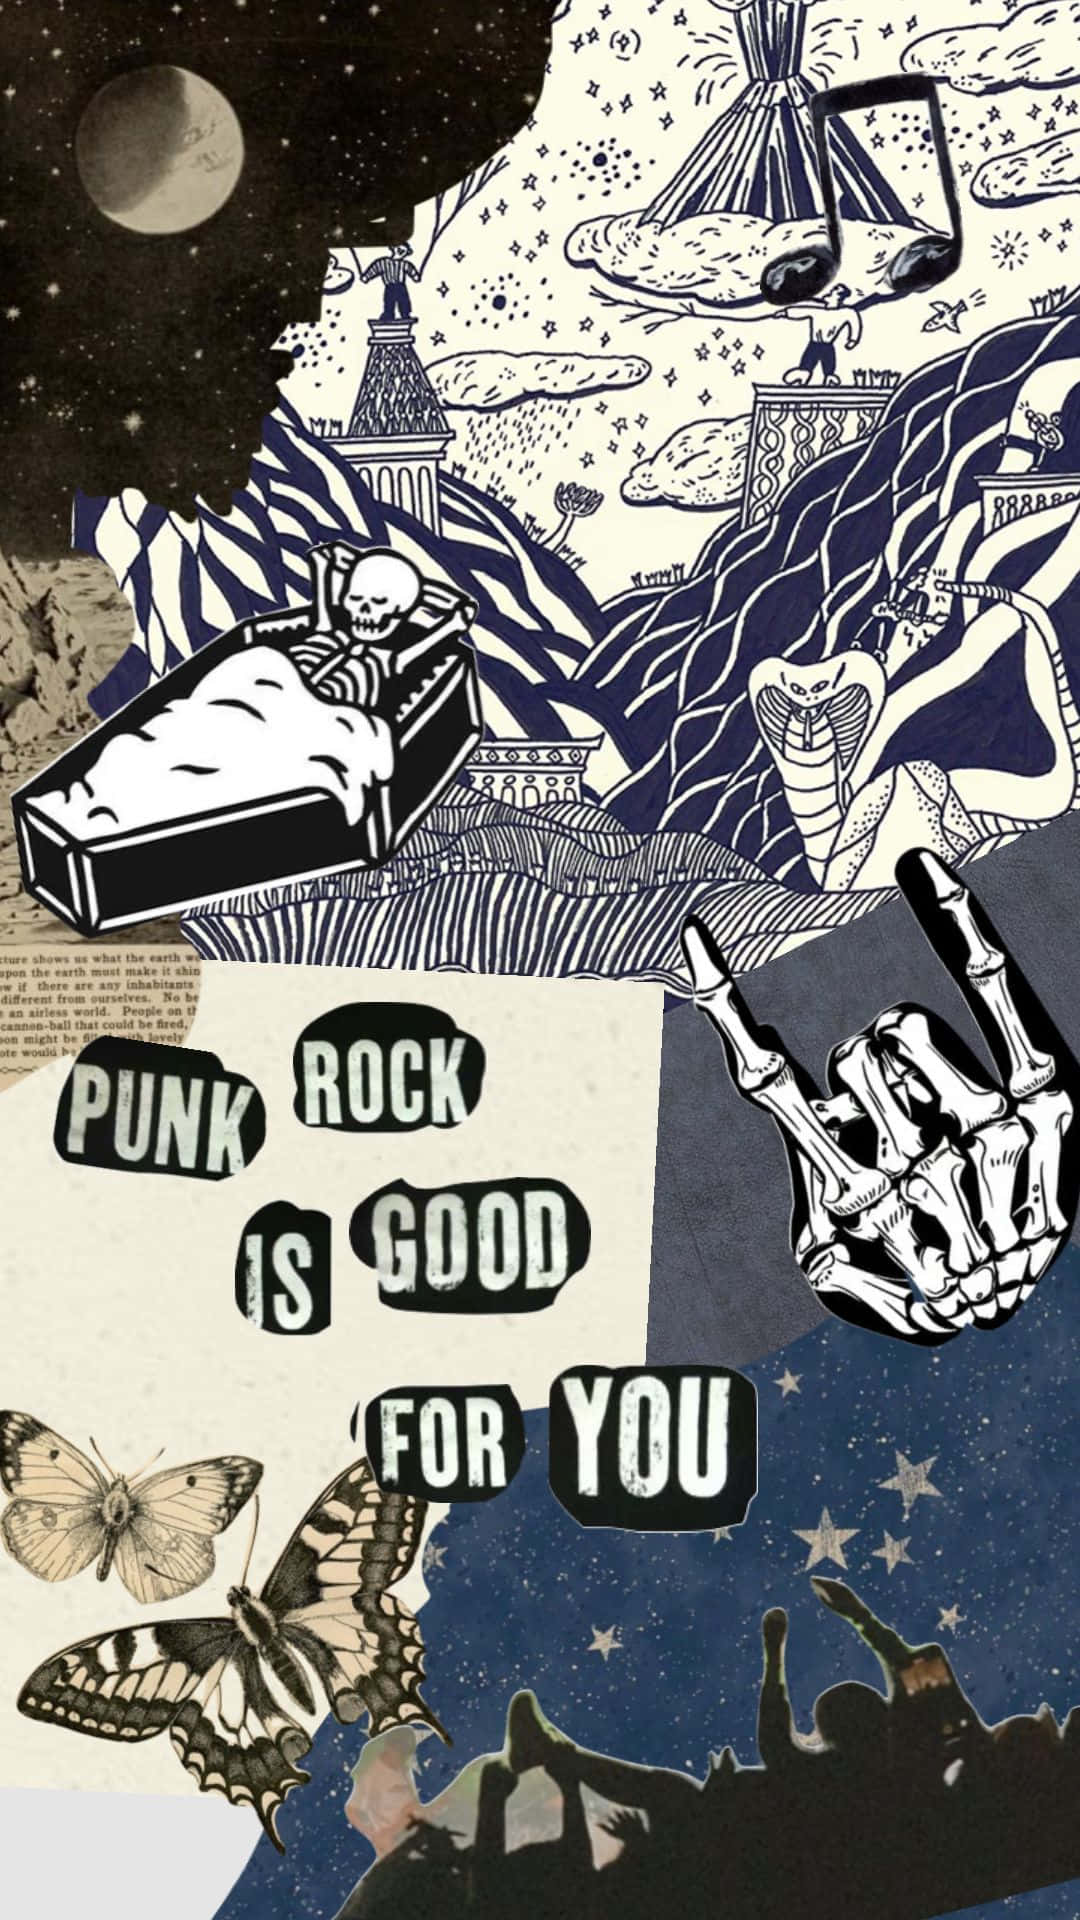 Punk Rock Good For You_ Collage Art Wallpaper